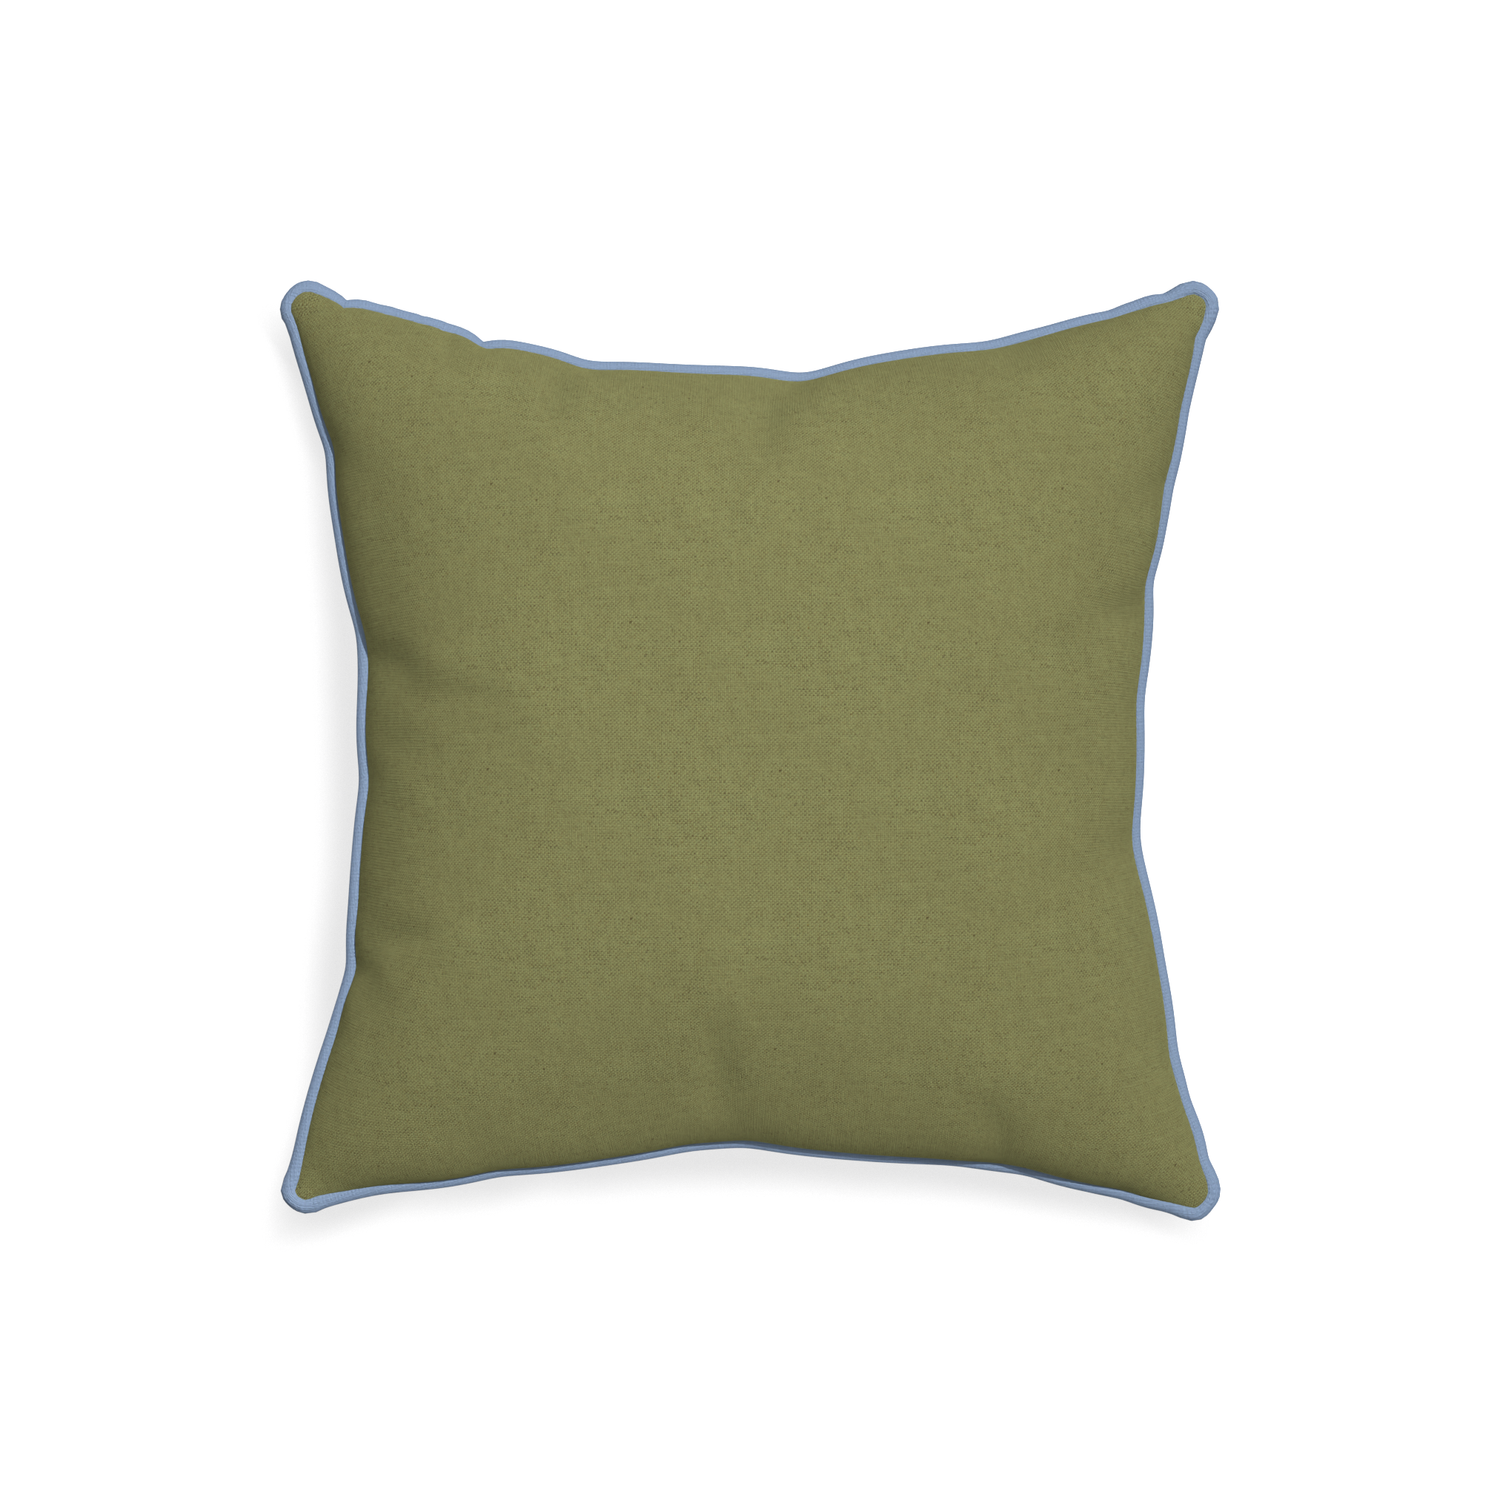 20-square moss custom moss greenpillow with sky piping on white background